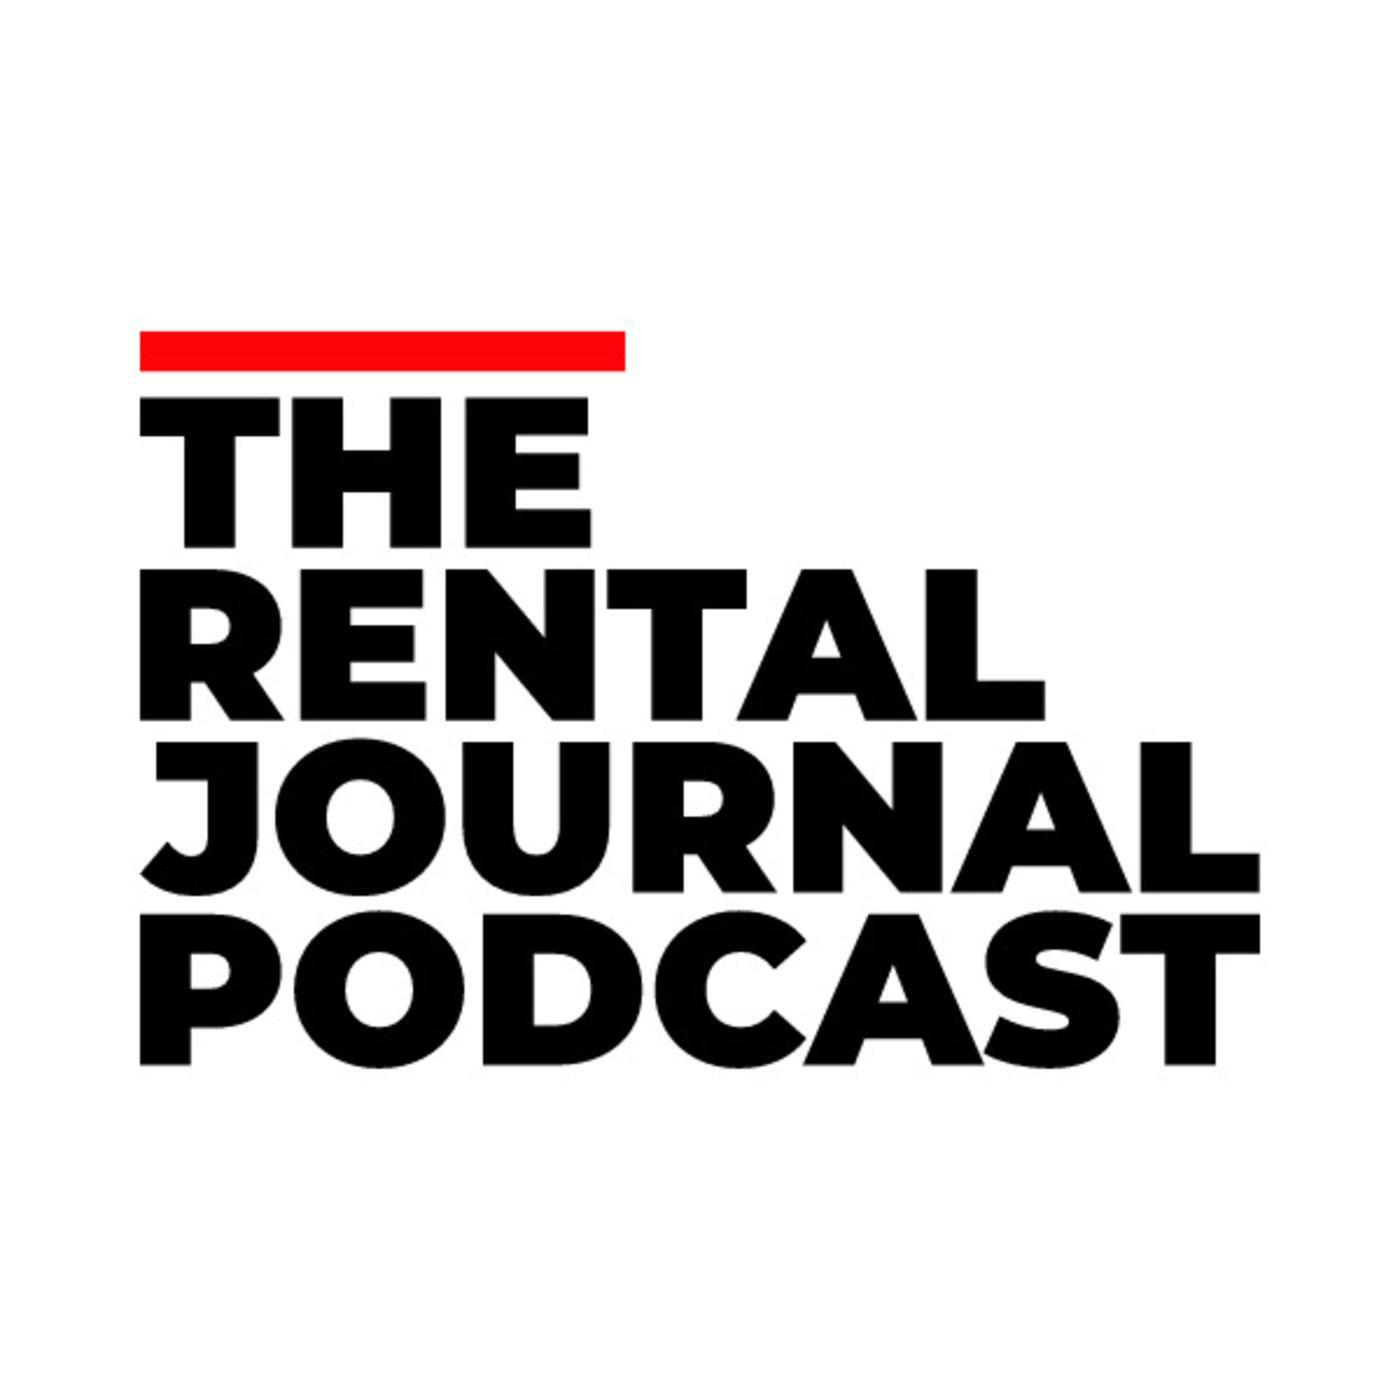 THE RENTAL JOURNAL PODCAST: #57 – KYLE CLEMENTS